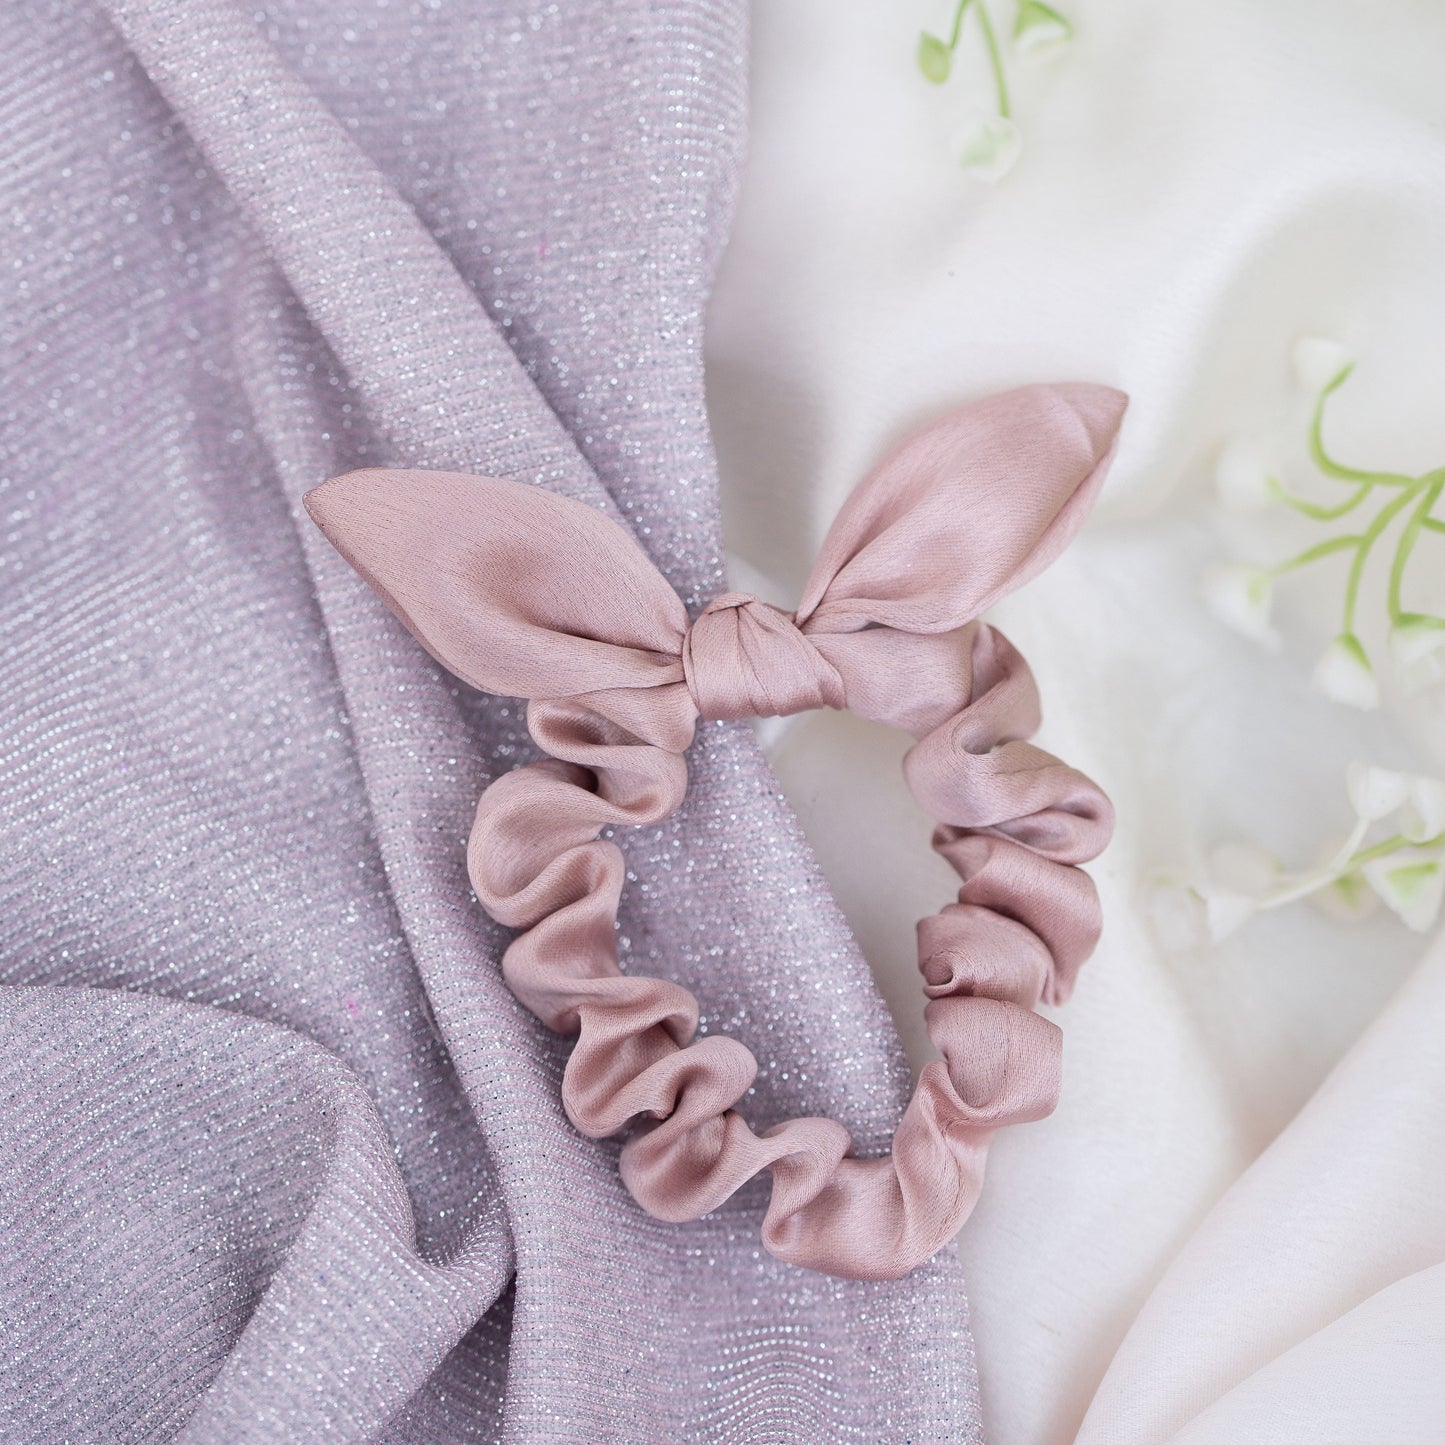 Ribbon Candy - Satin Scrunchie With Tie Knot Detail - Dusty Pink